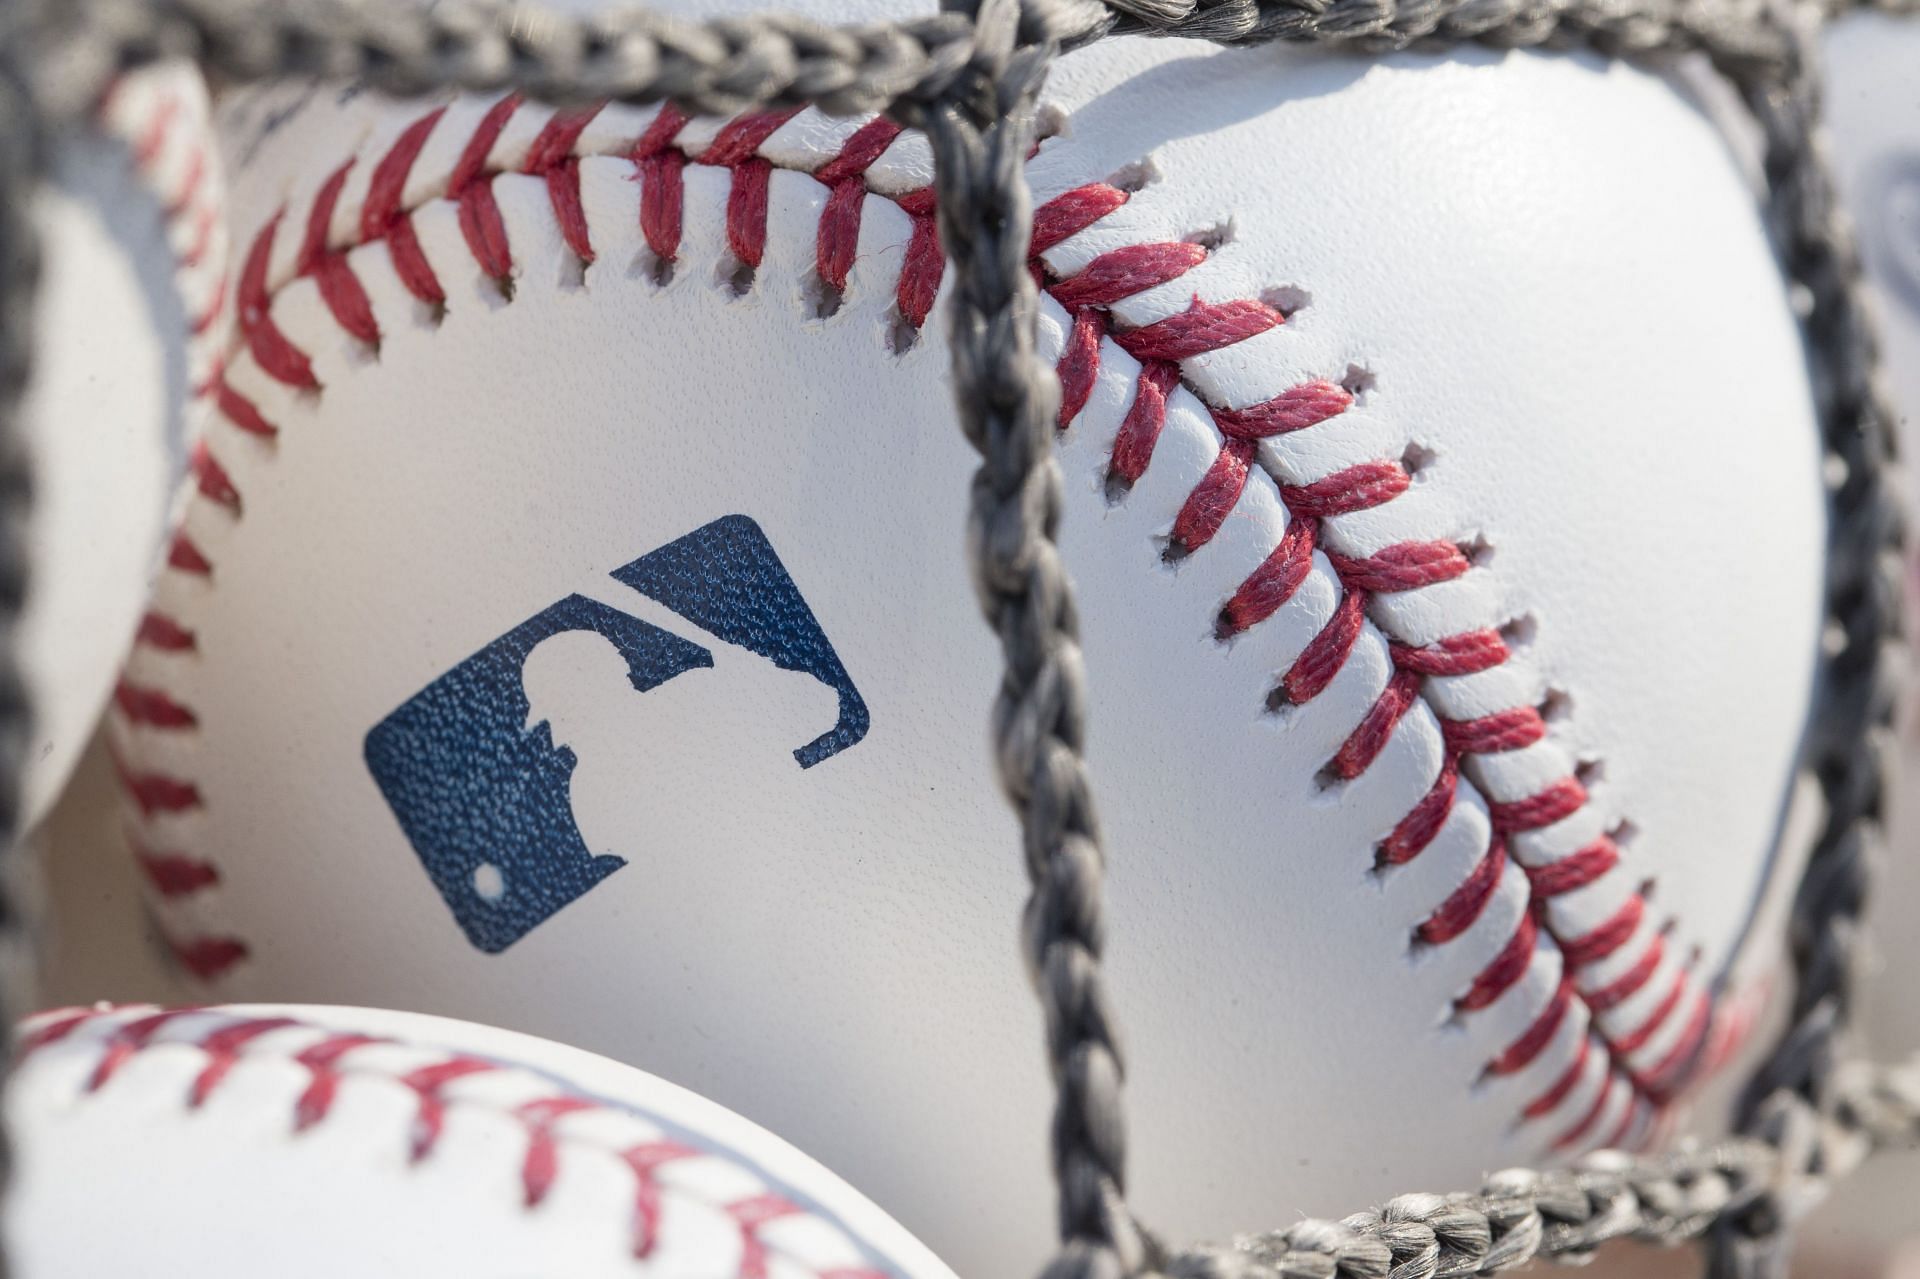 The MLB ratified the Joint Domestic Violence, Sexual Assault and Child Abuse Policy in 2015